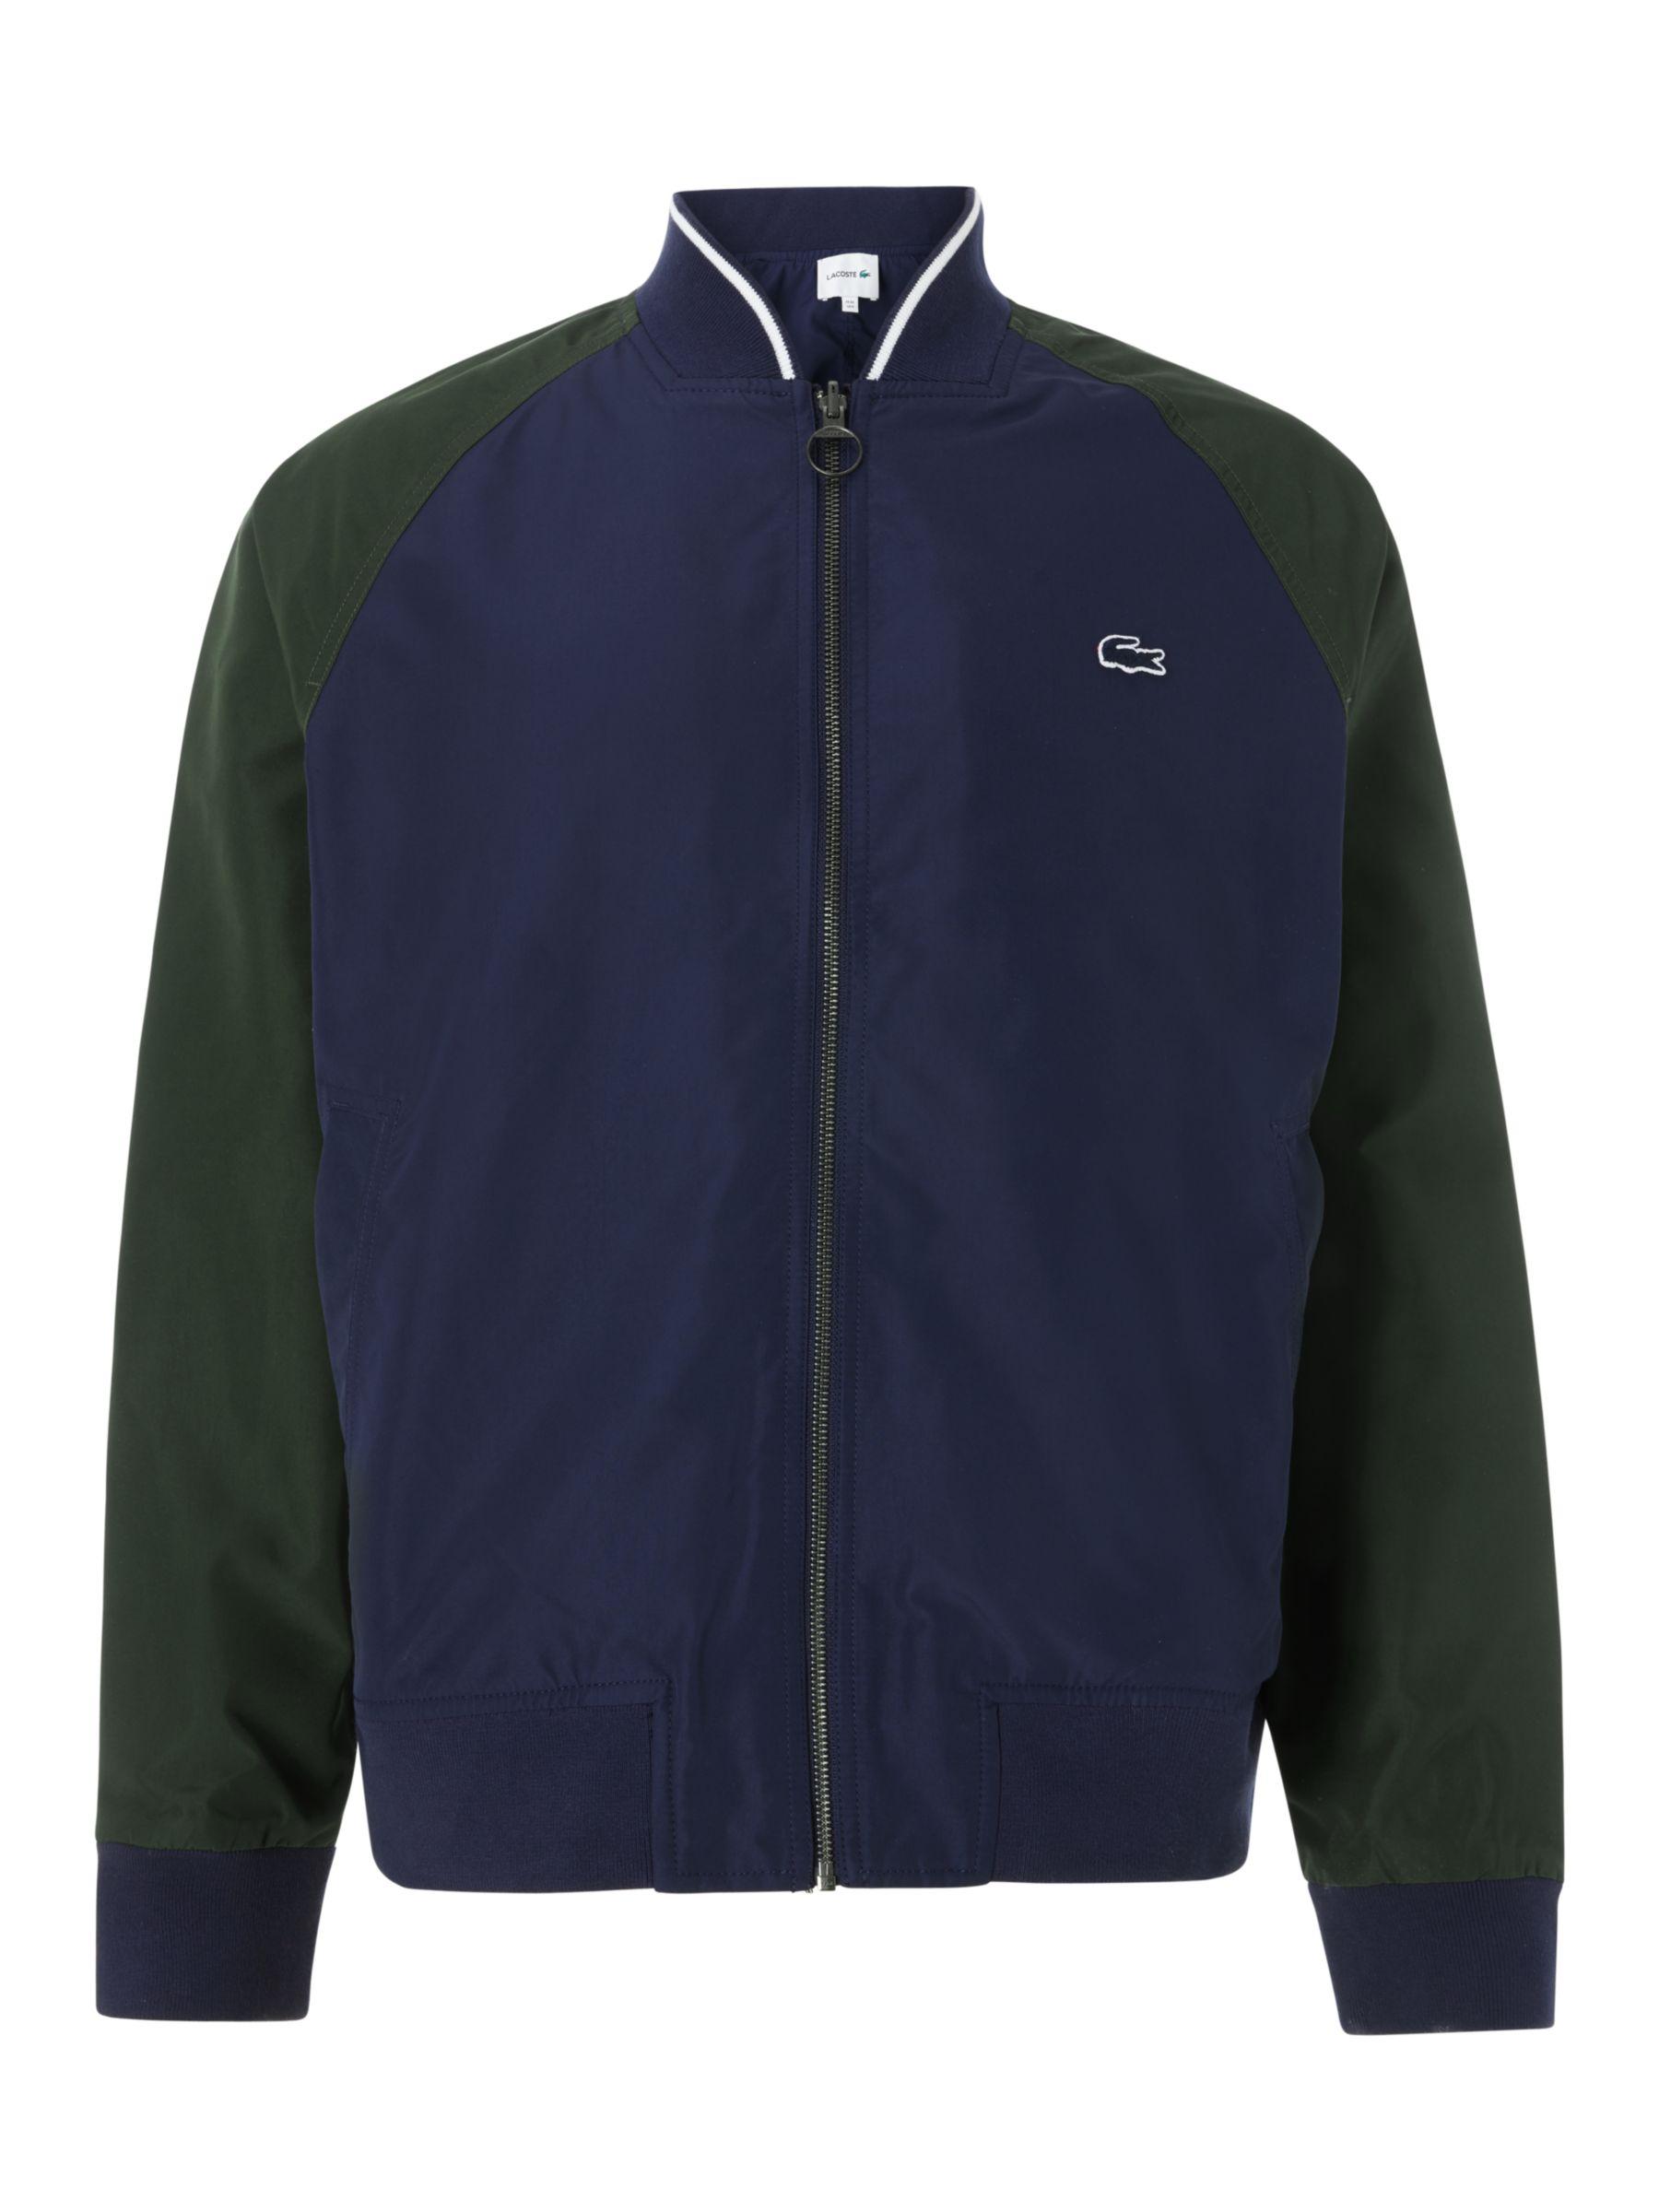 Lacoste Synthetic Reversible Bomber Jacket in Navy (Blue) for Men - Lyst